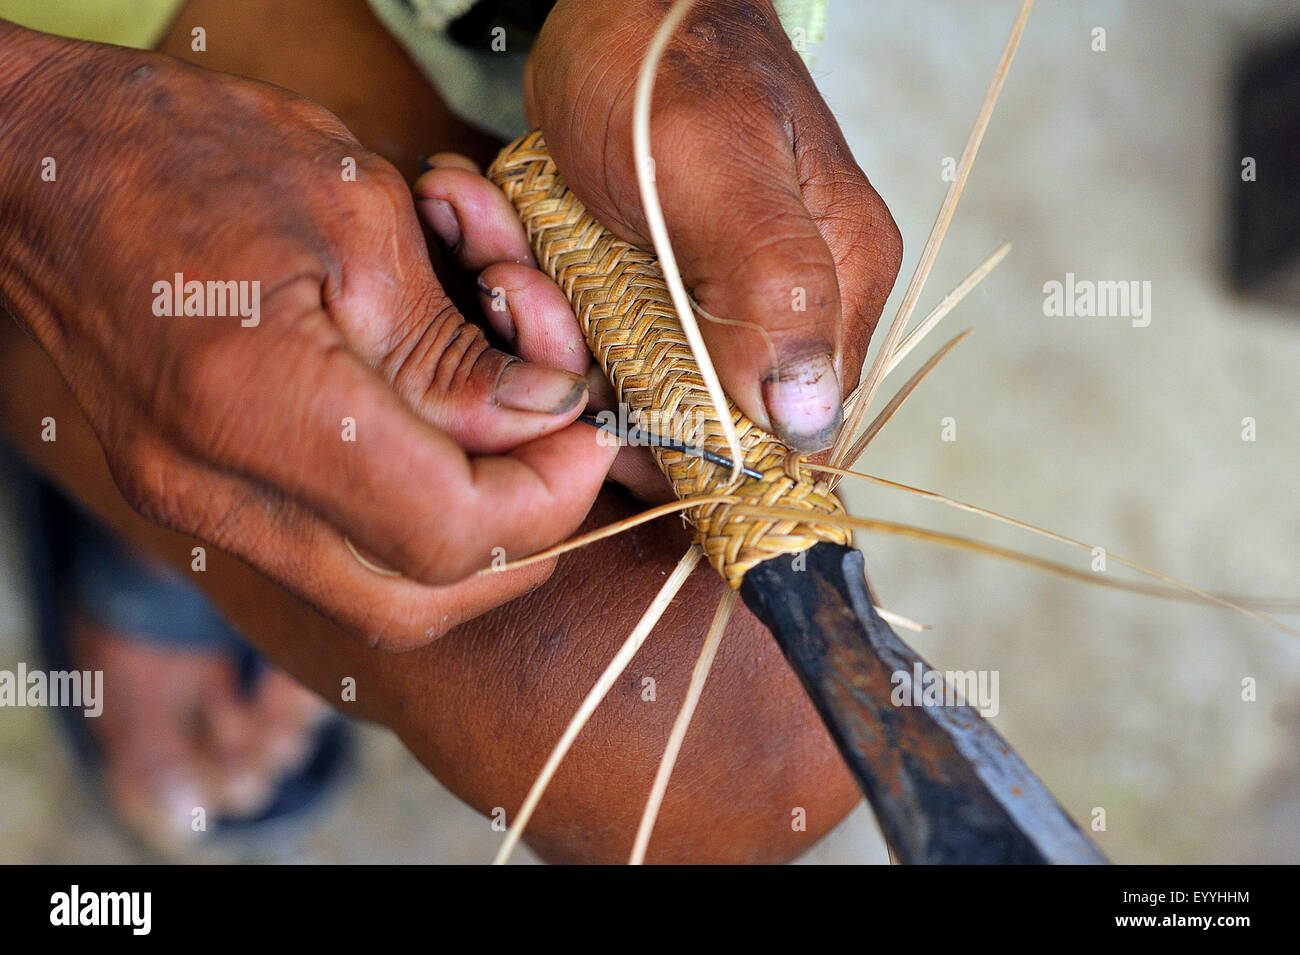 knife handle is braided, Philippines, Luzon, Banaue Stock Photo